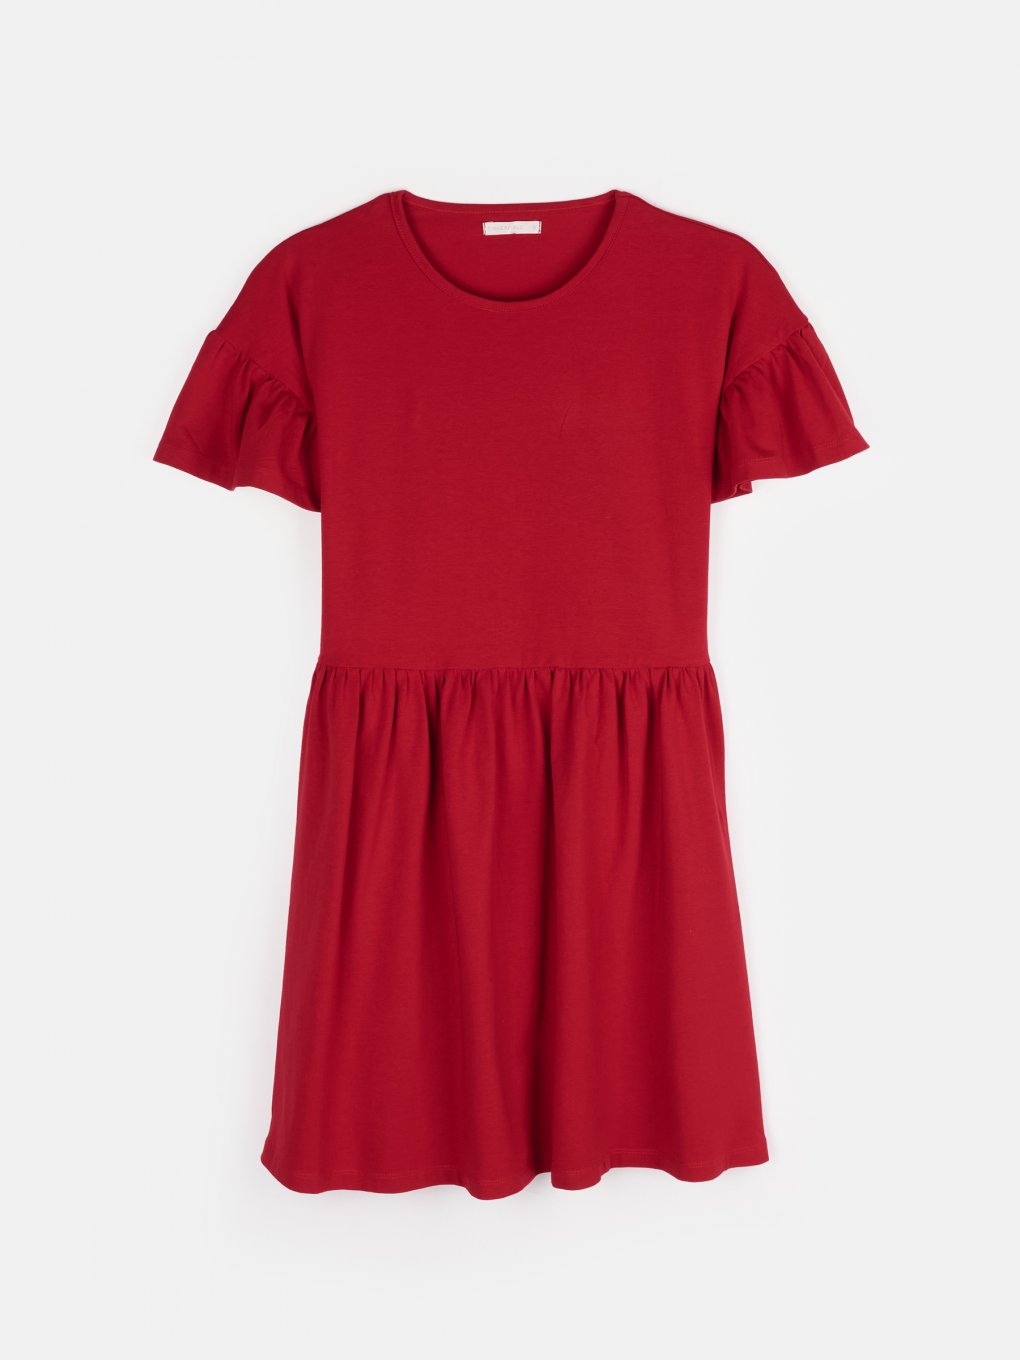 Cotton dress with ruffled sleeves